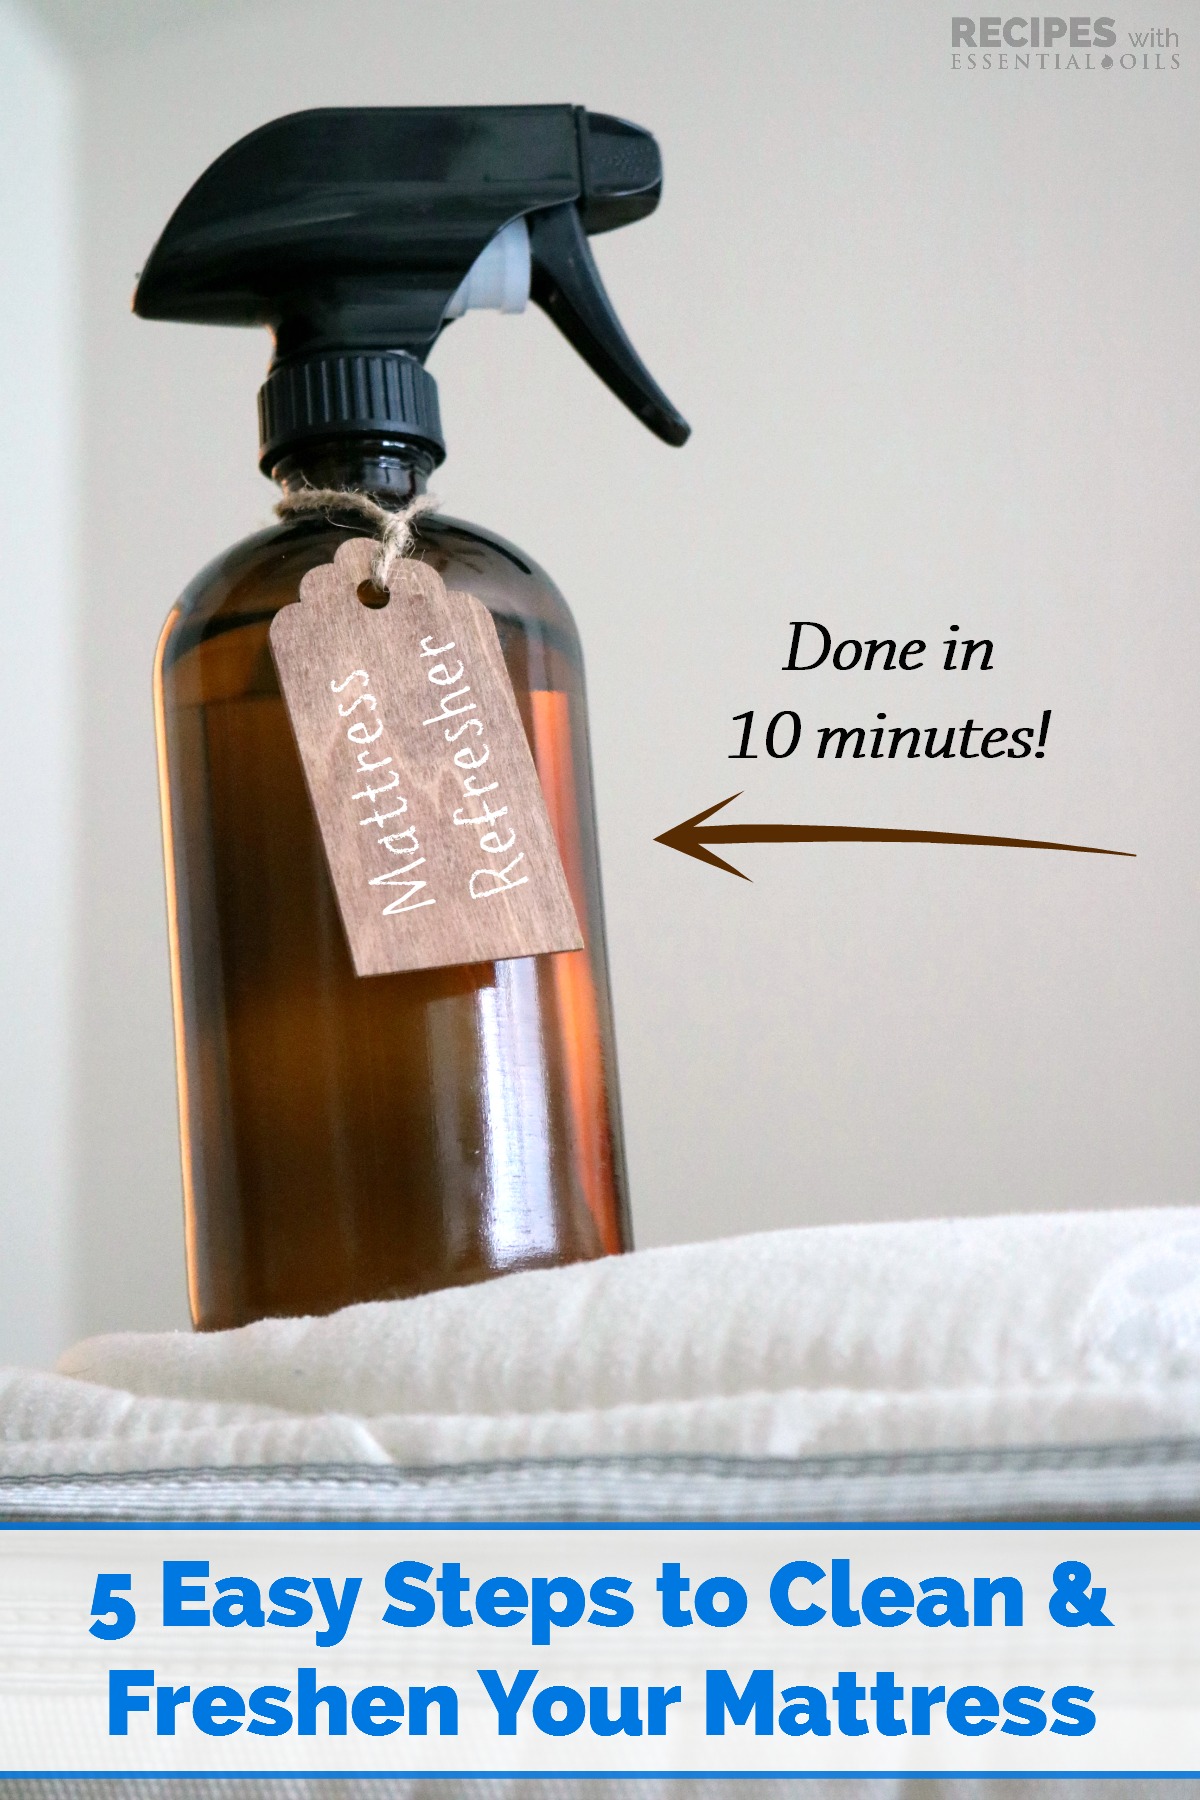 5 Easy Steps to Clean and Freshen Your Mattress from RecipeswithEssentialOils.com